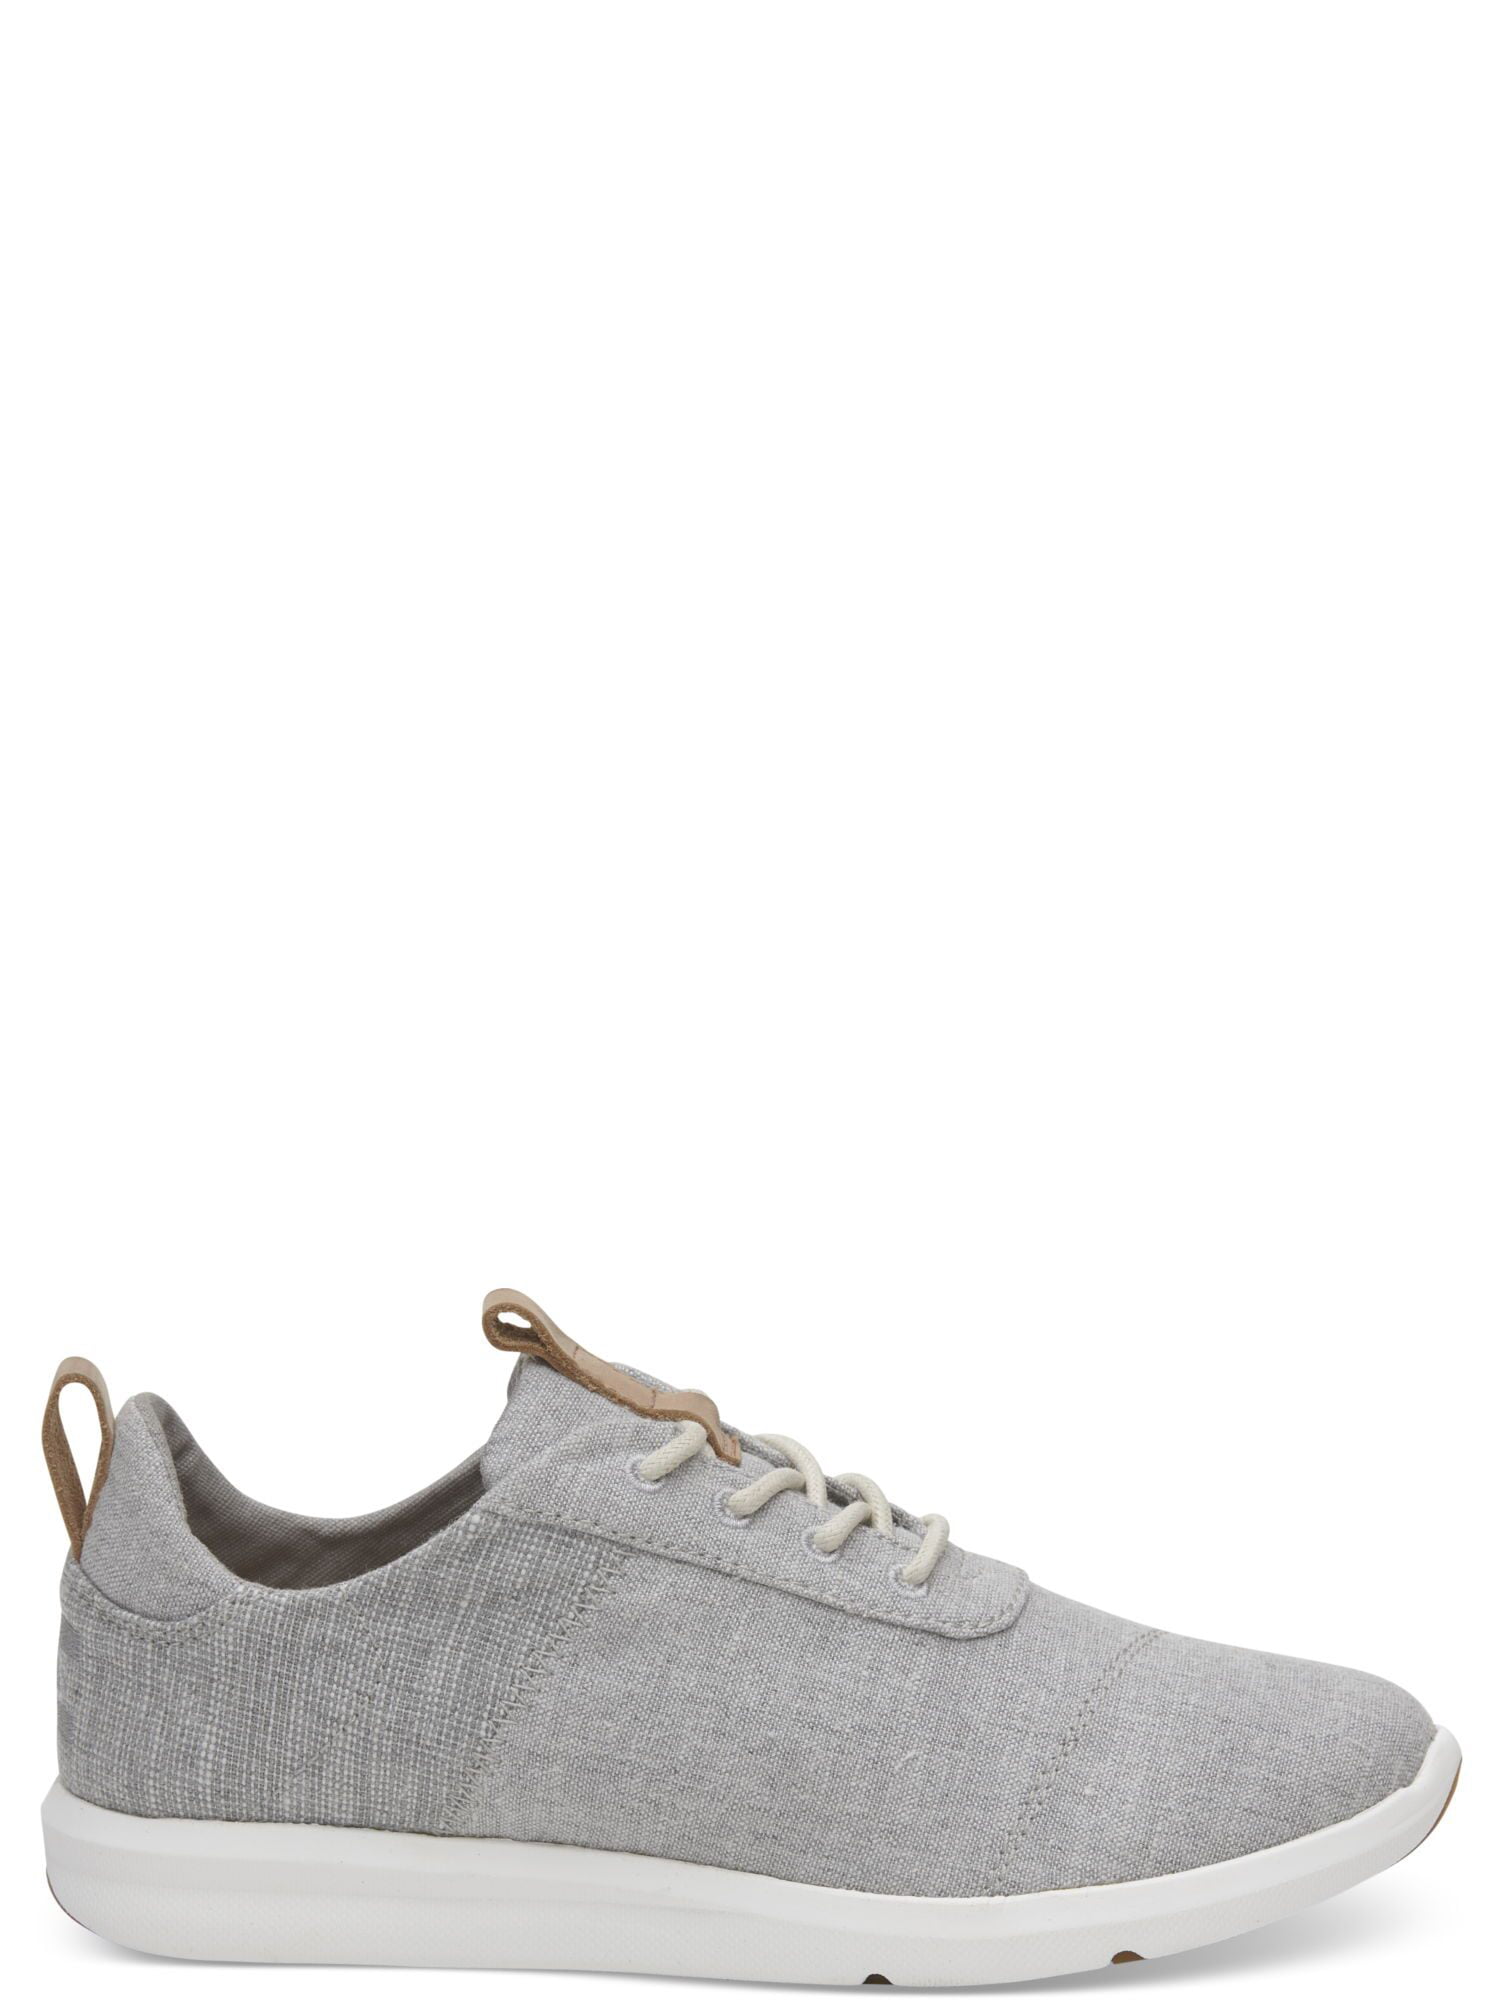 TOMS Women's Drizzle Grey Chambray Mix 